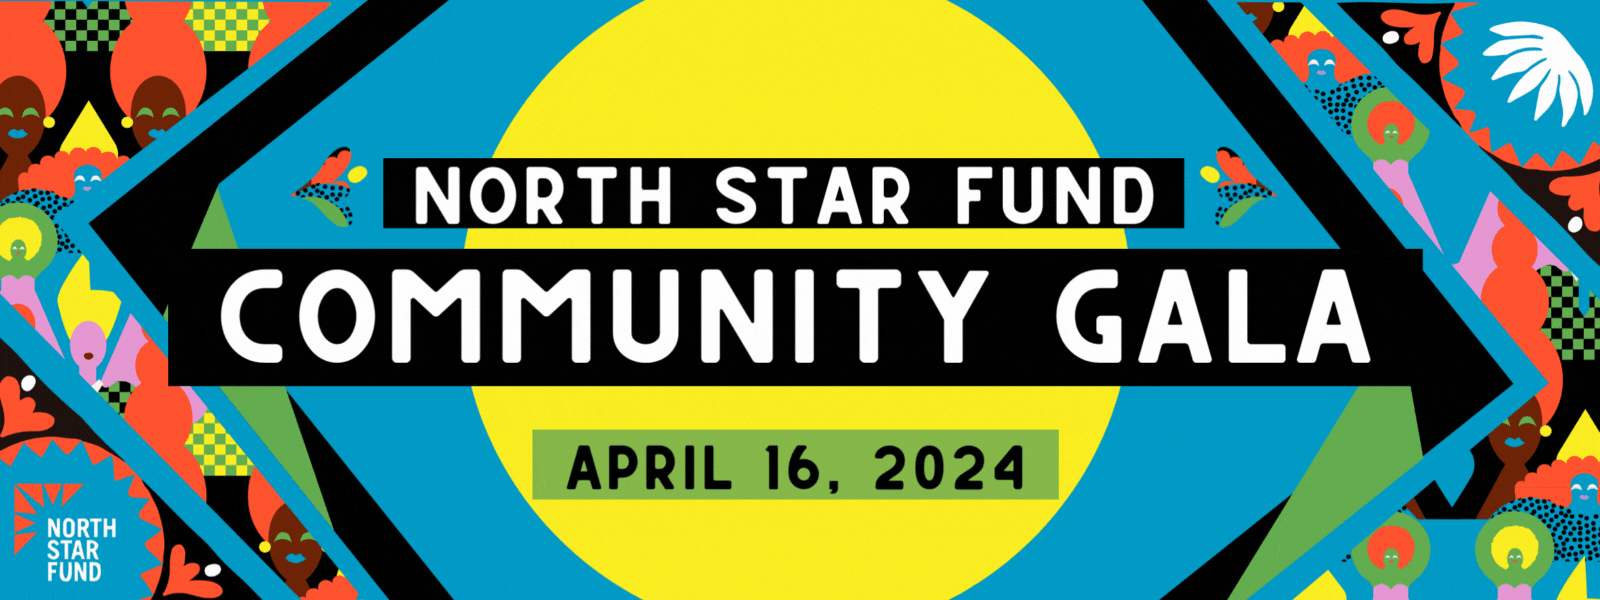 Save the Date April 16, 2024 for the Community Gala